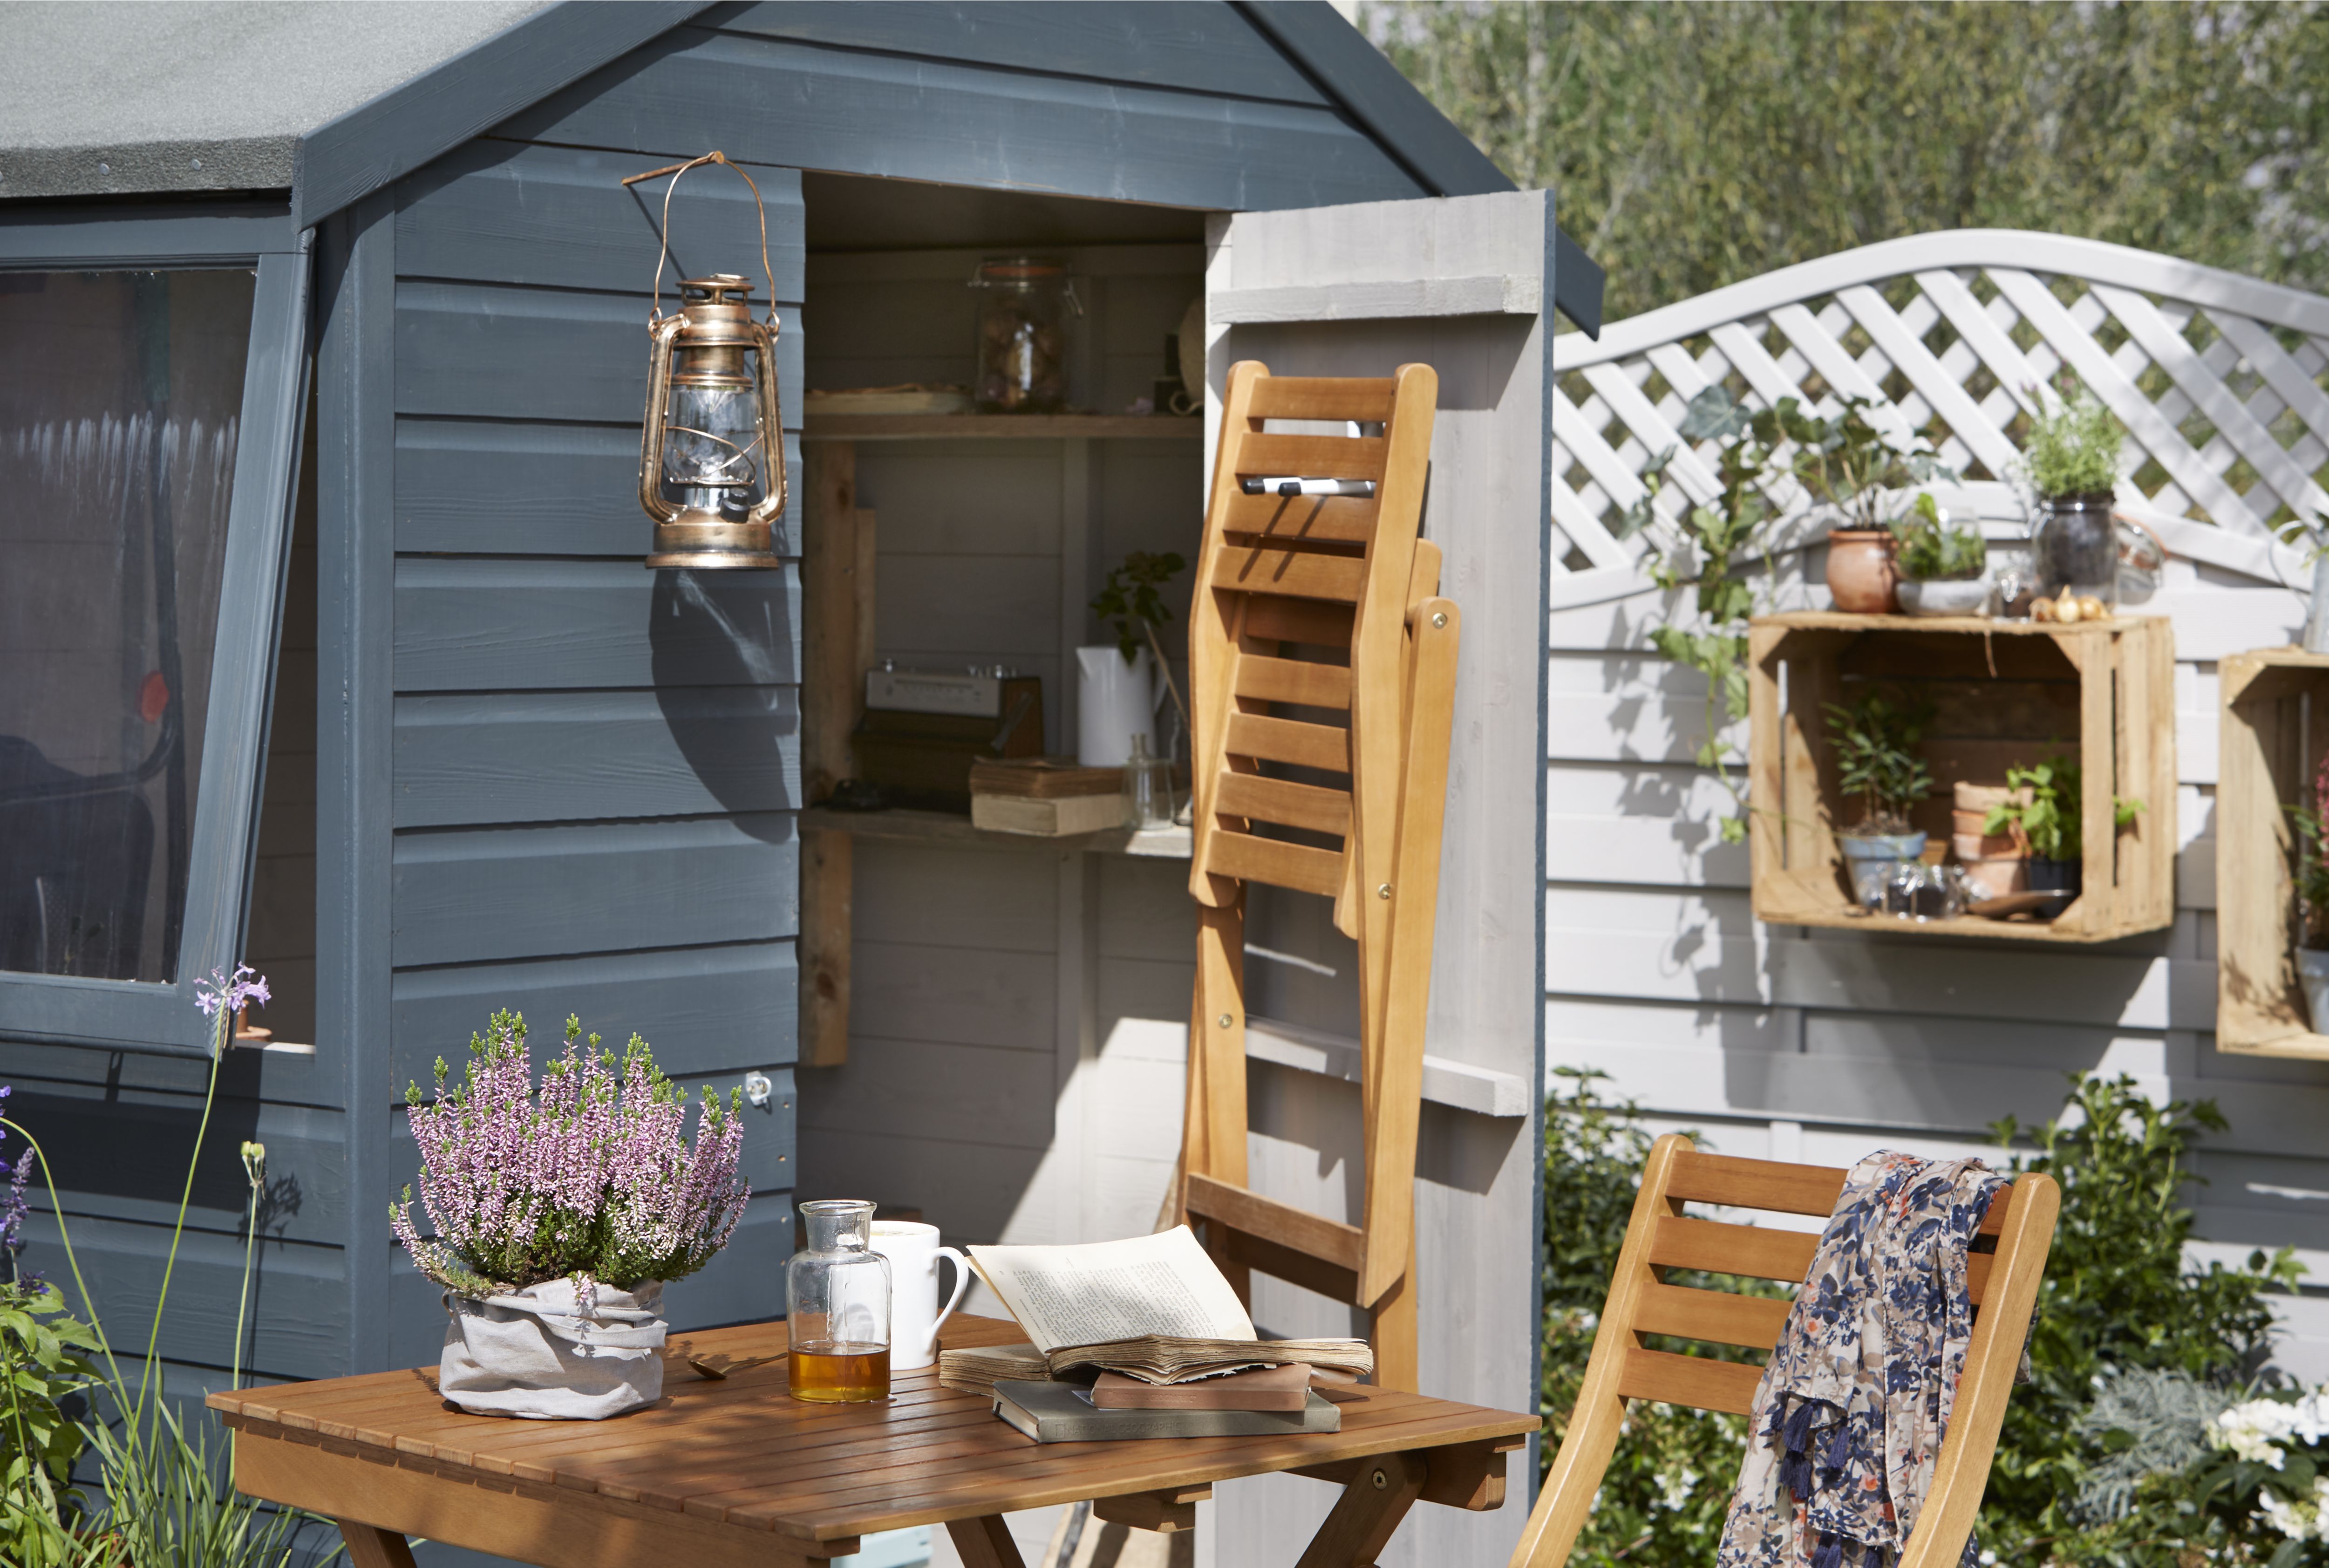 How to paint a wooden shed or fence Ideas &amp; Advice DIY ...